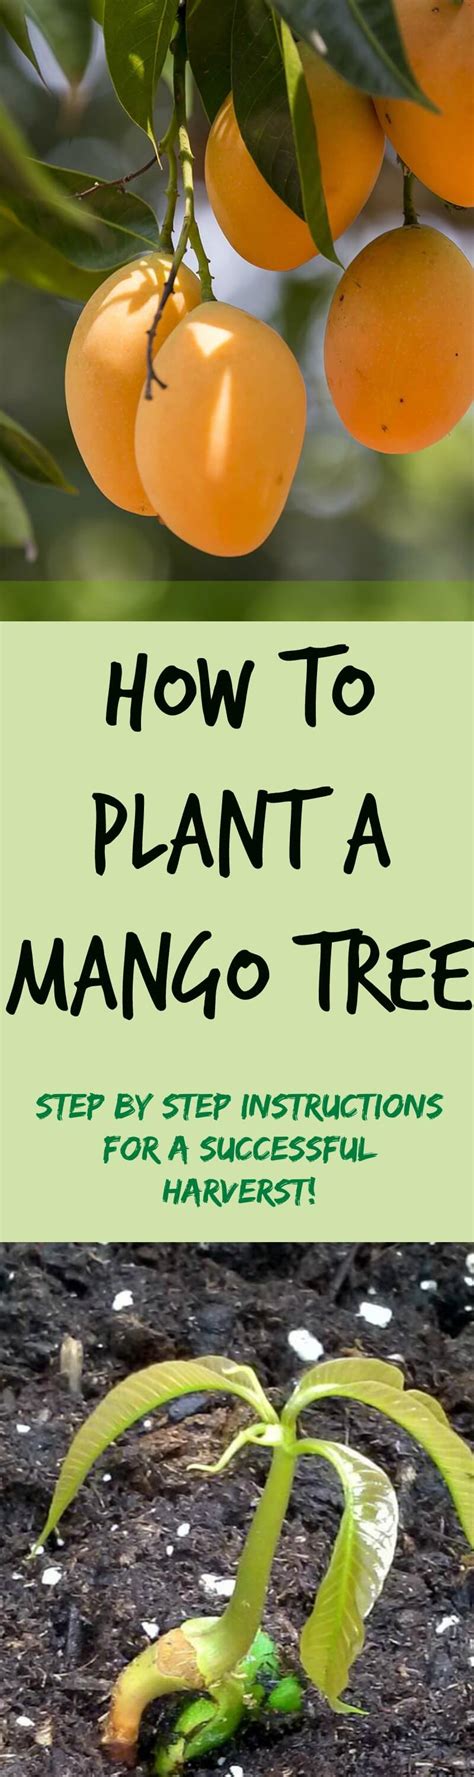 How To Plant Mango Seed Plant Instructions